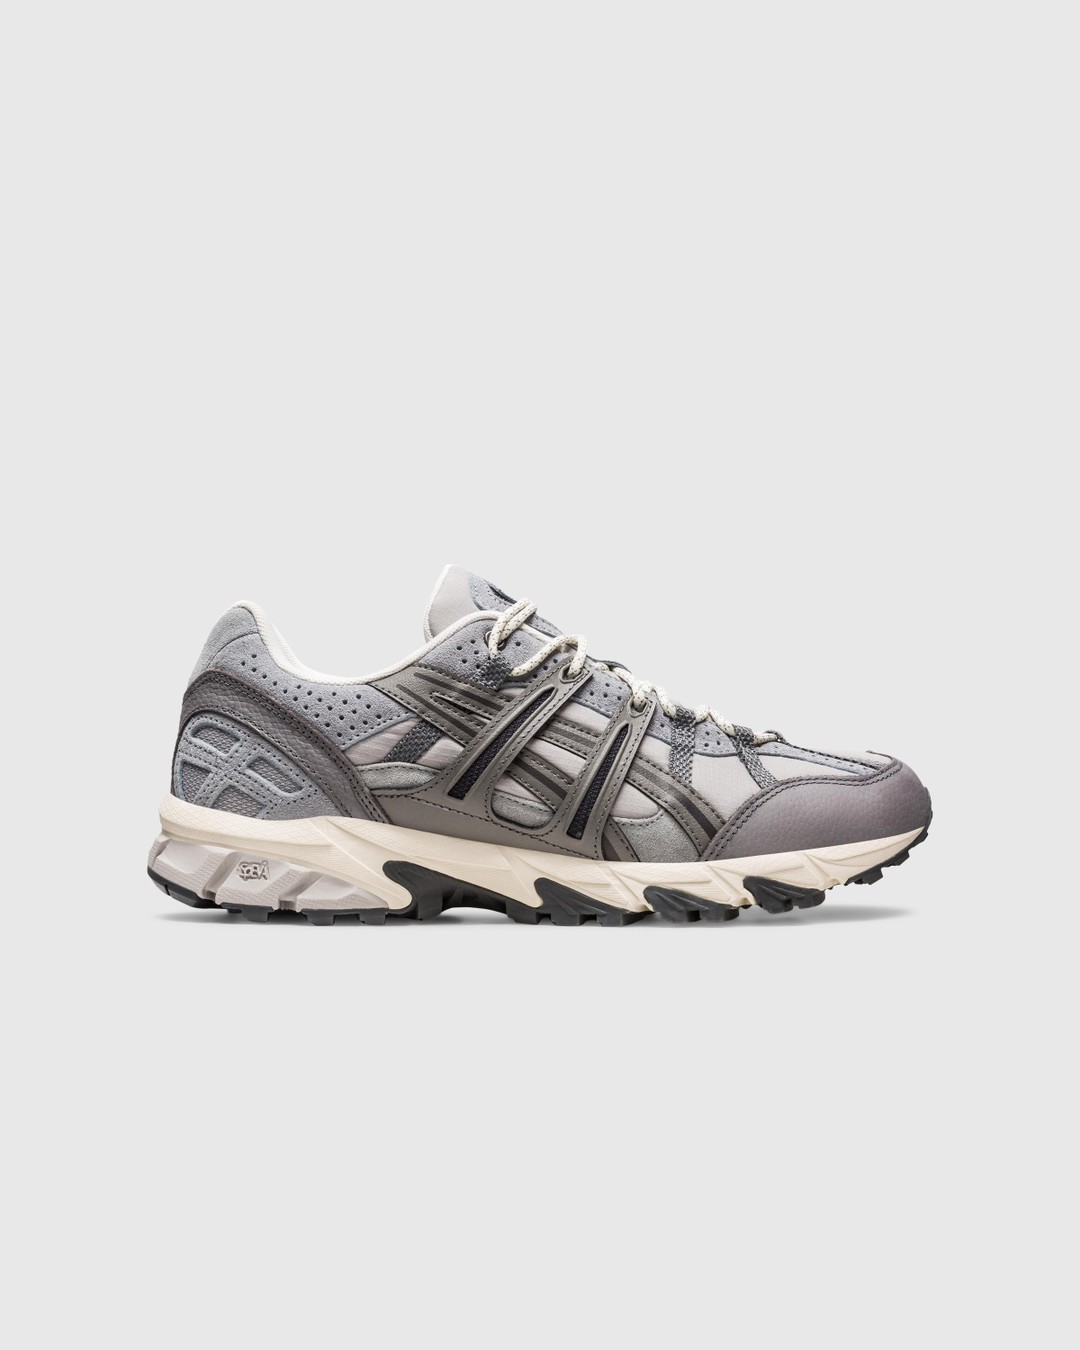 asics – GEL-SONOMA 15-50 Oyster Grey/Clay Grey - Sneakers - Grey - Image 1